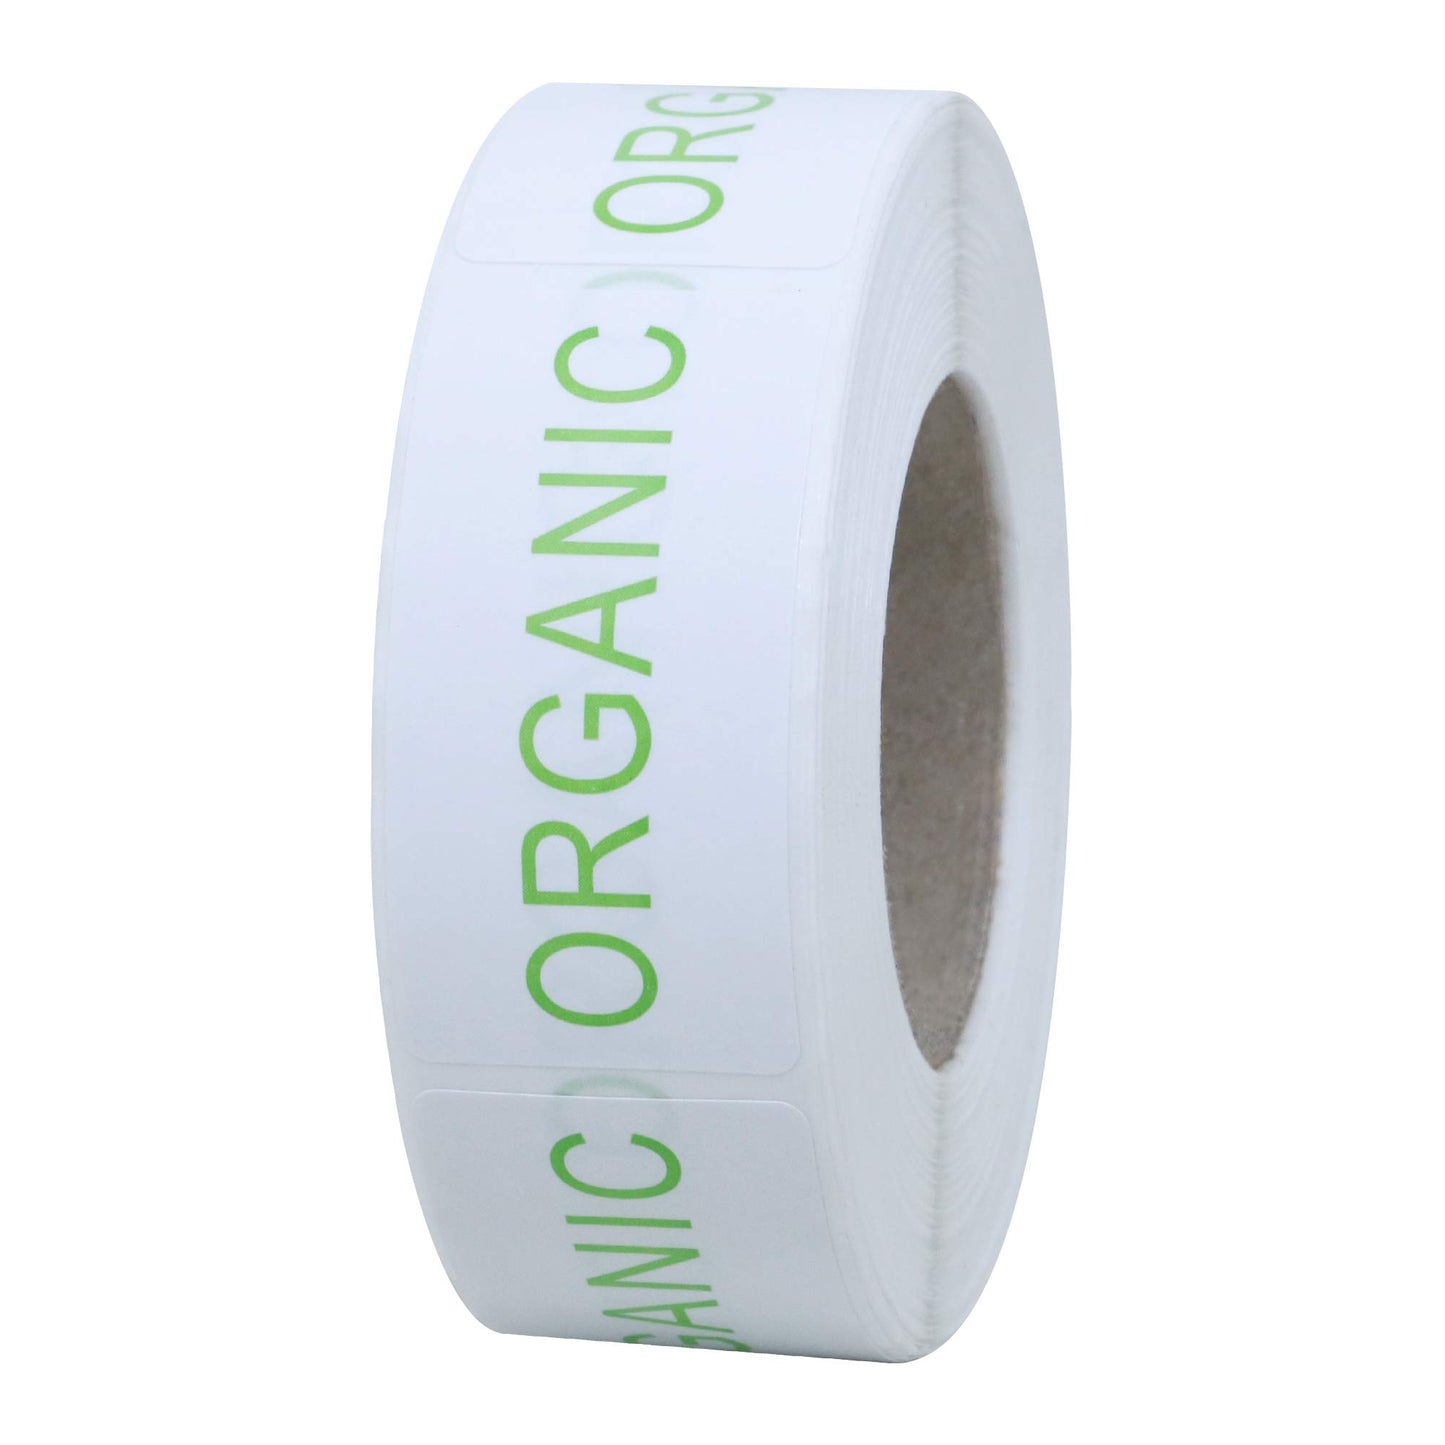 Hybsk White with Green Organic Rectangle Stickers, 1 x 2 Inches in Size, 500 Labels on a Roll